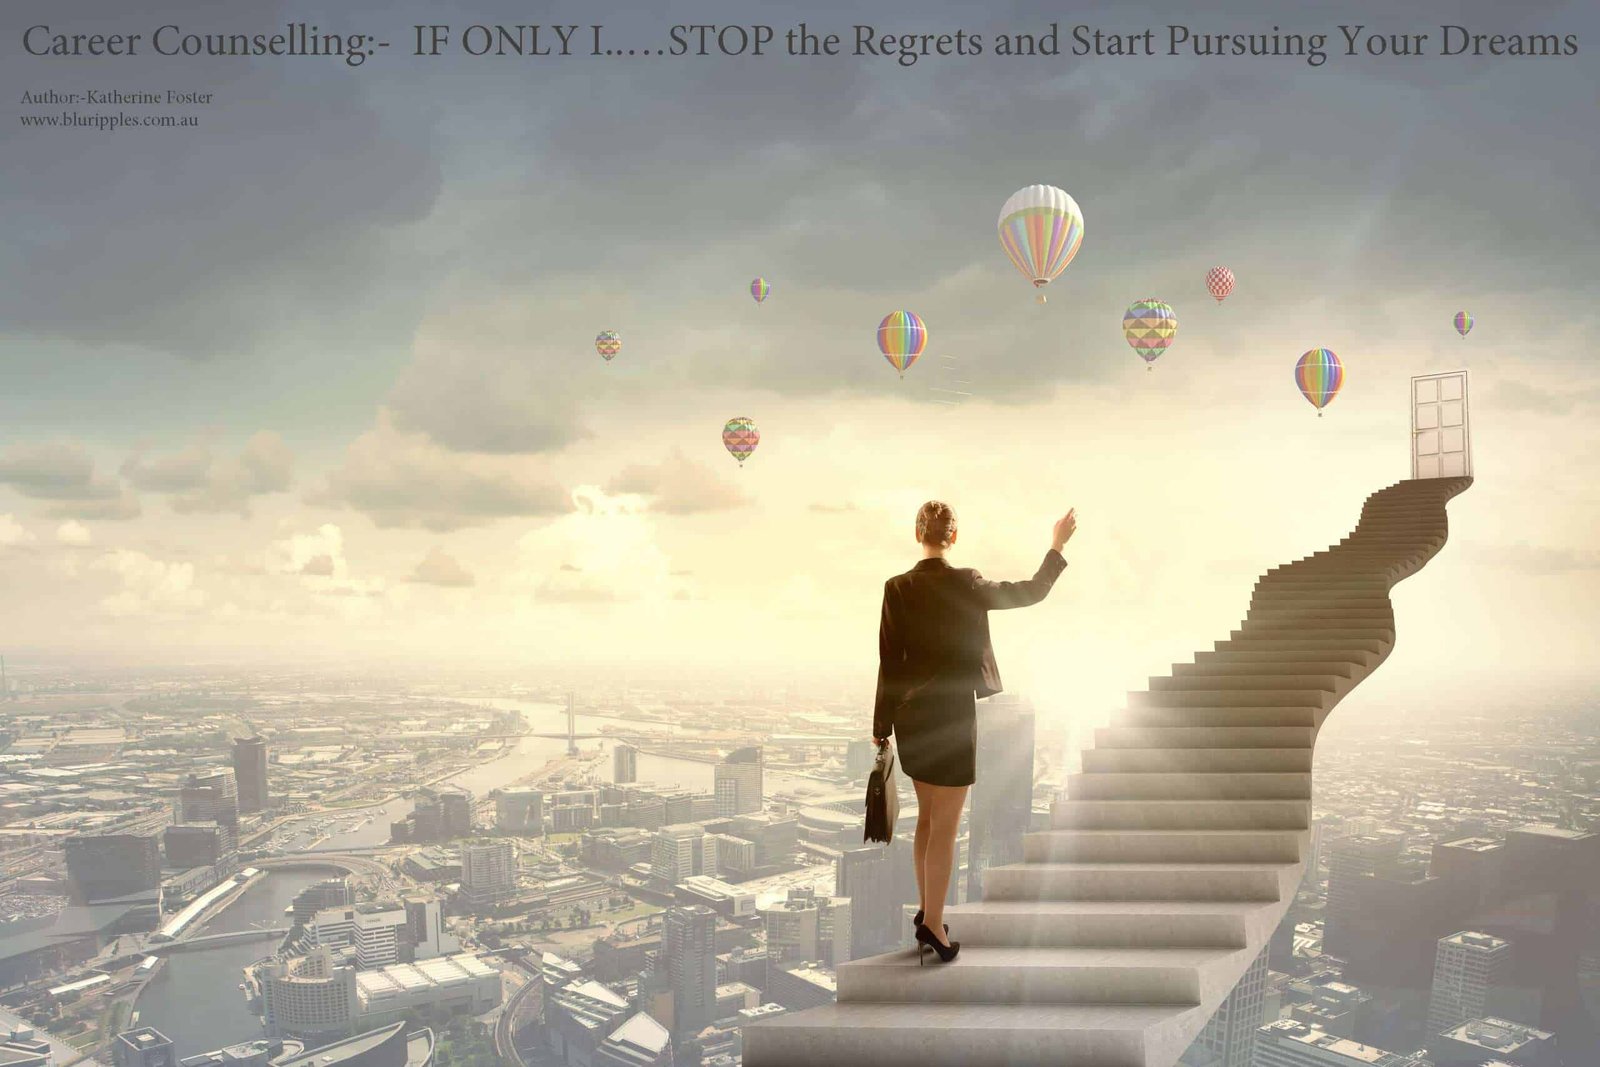 Career Counselling: - Stop The Regrets and Start Pursuing Your Dreams By Katherine Foster